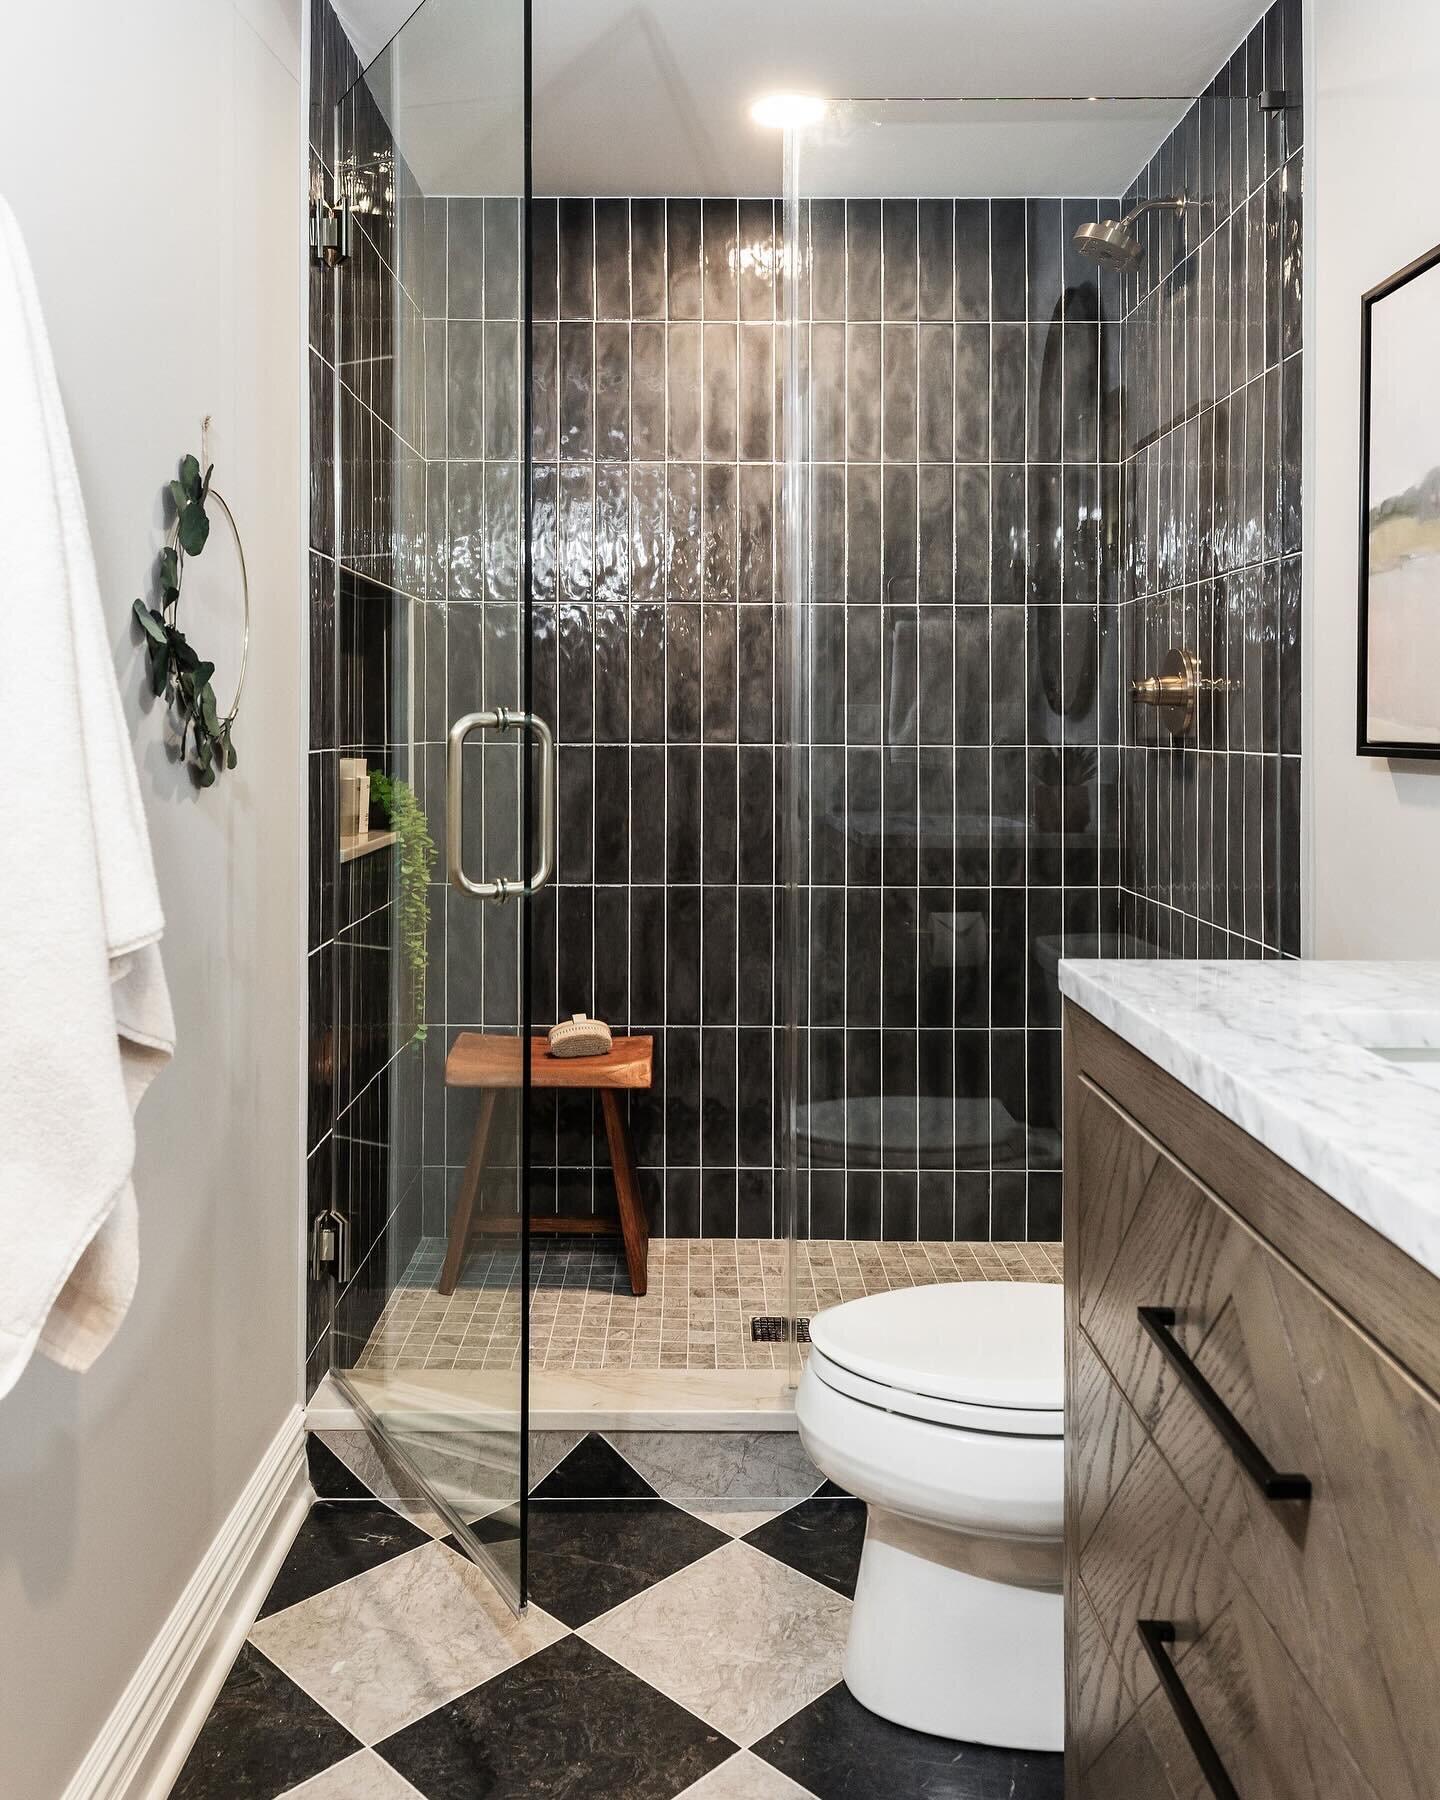 This basement bathroom was basic and blah, so it was totally reimagined! Originally there was just a pedestal sink and toilet, but luckily there was space available behind the back wall to open up and create a spa-like shower. Swipe over for the befo